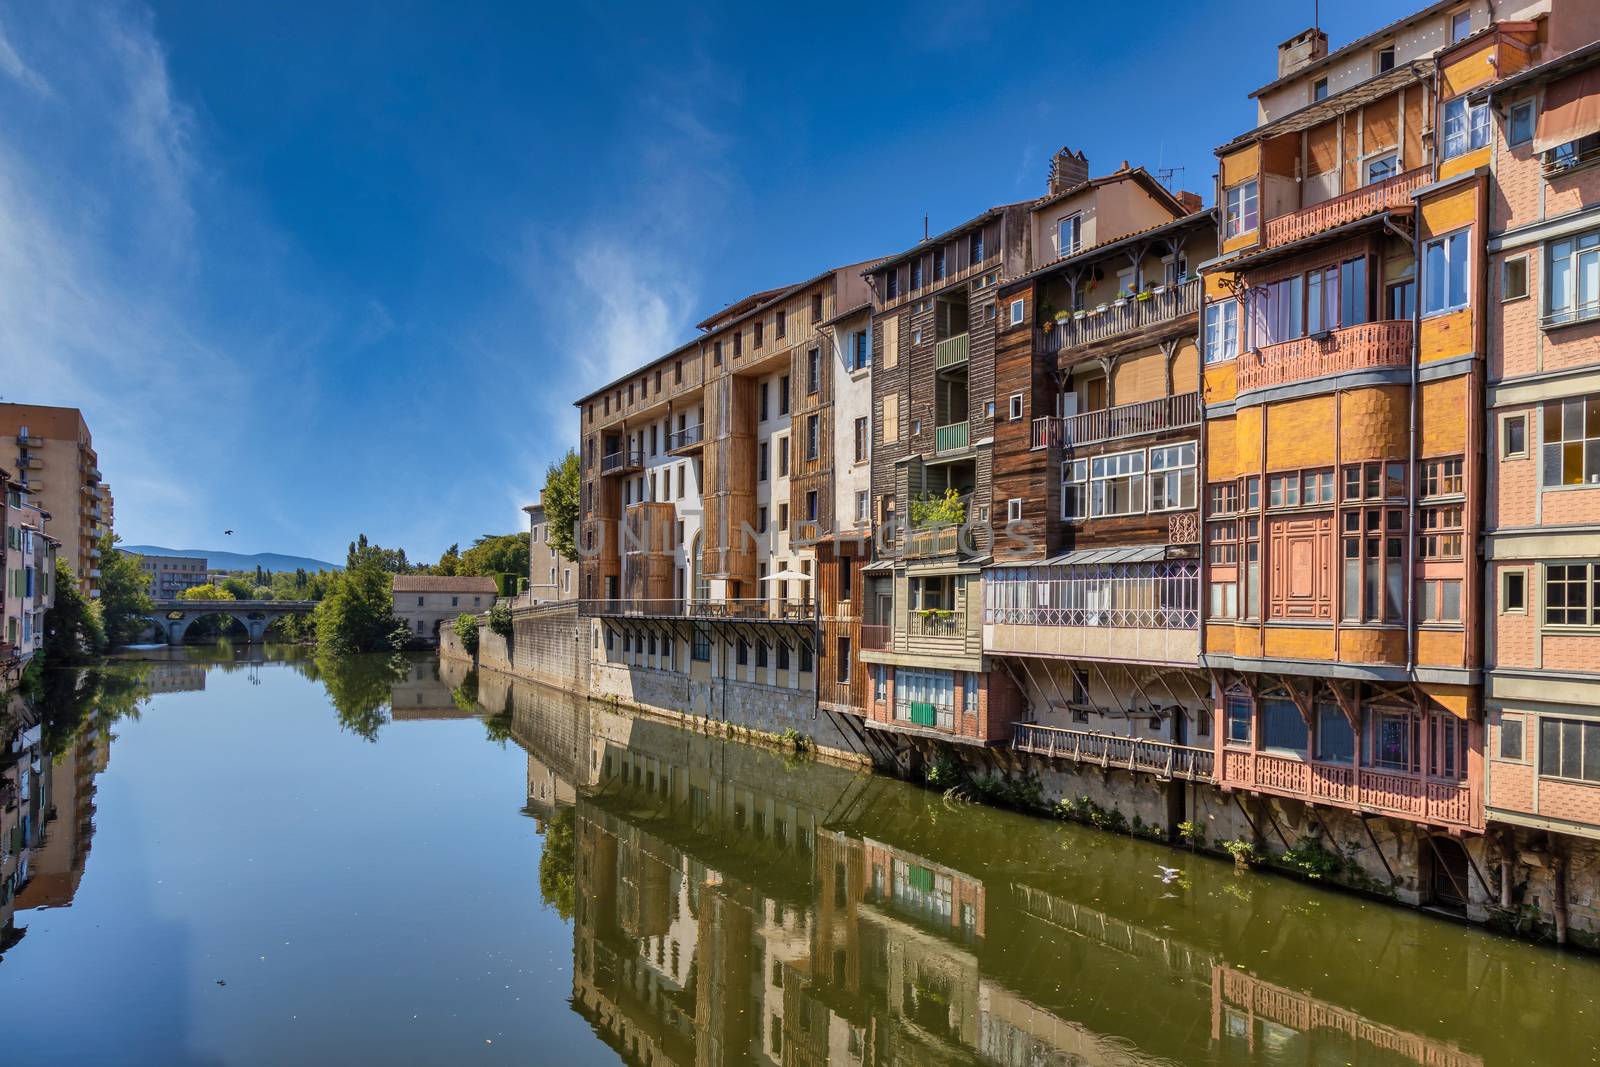 Nice buildings on the river Tarn in French town Castres. by Digoarpi